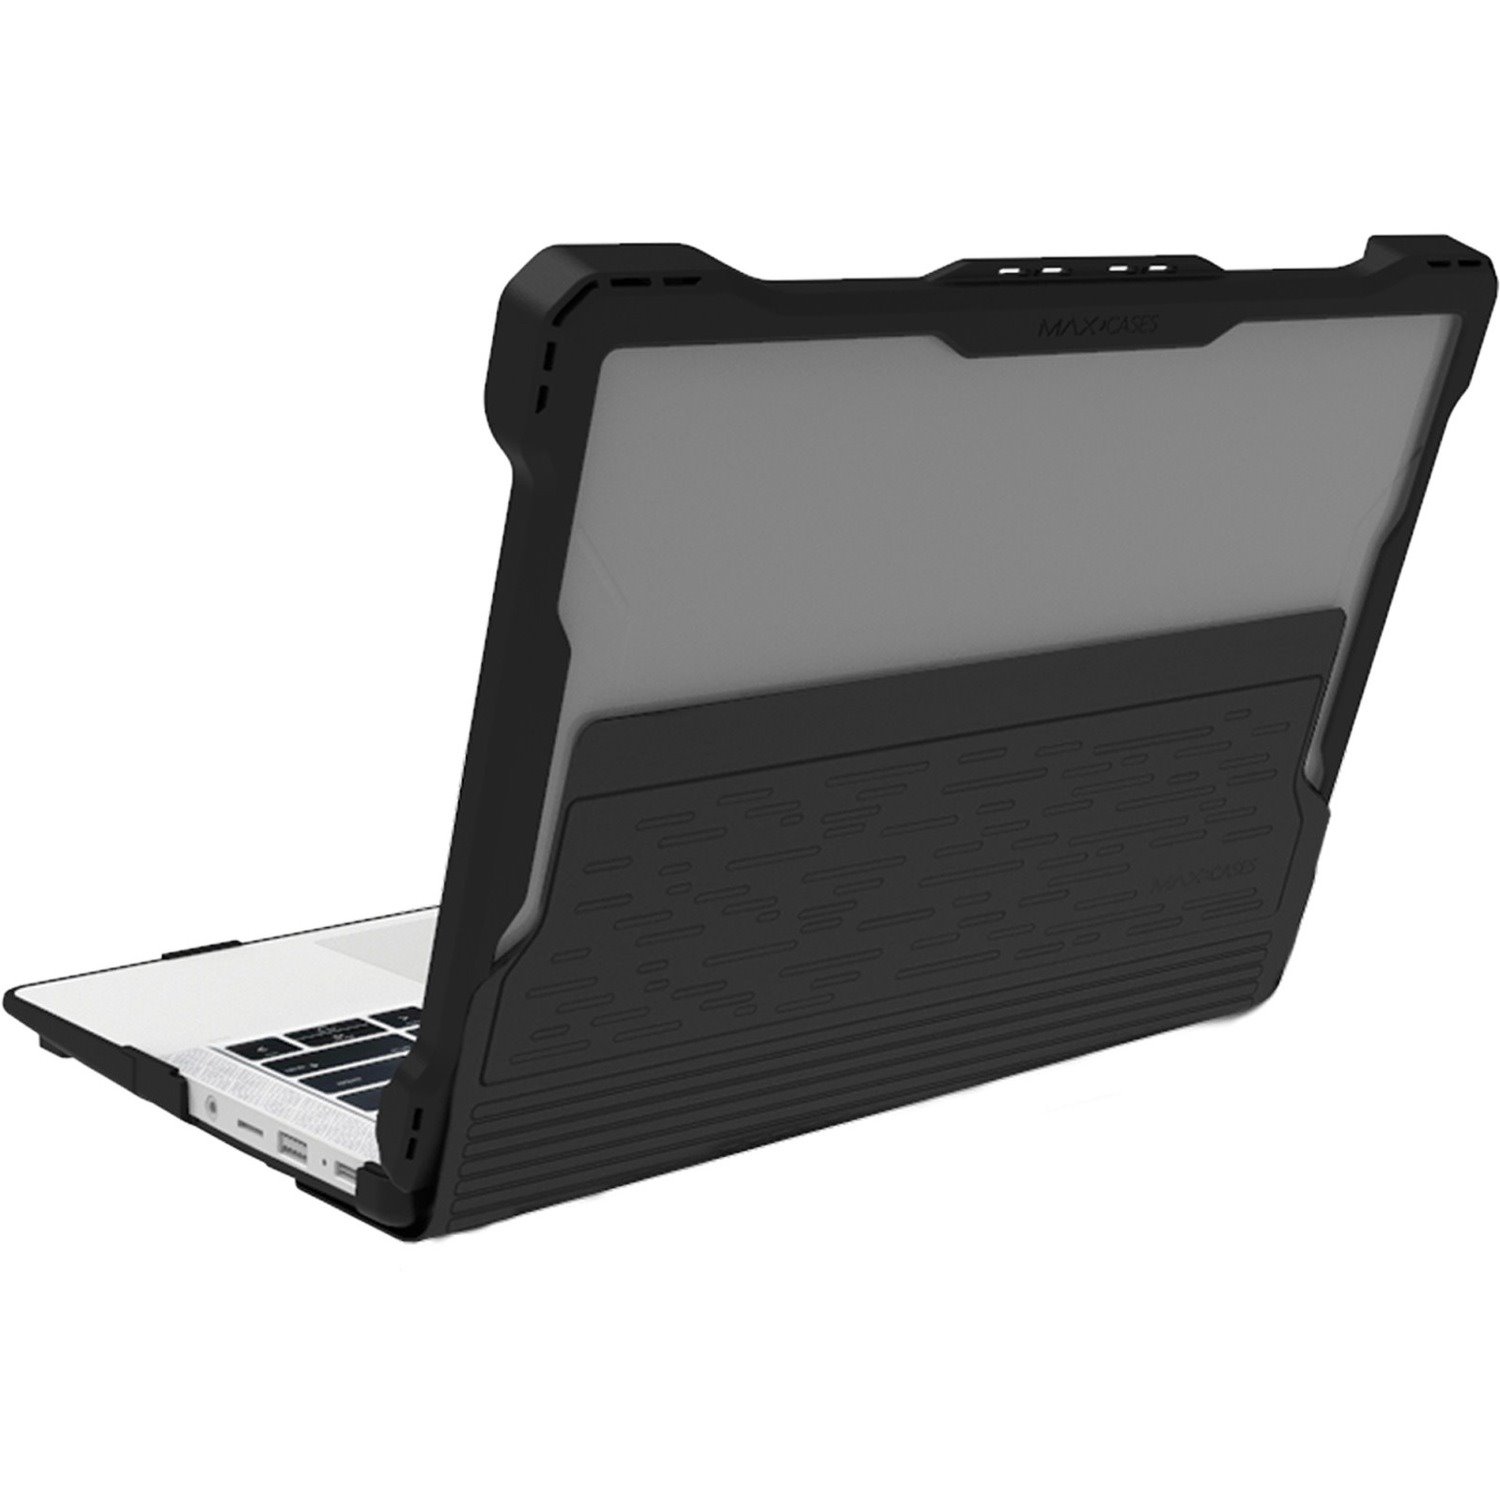 MAXCases Extreme Shell-L for Dell 3100 Chromebook 2:1 Convertible 11.6" (Black/Clear)